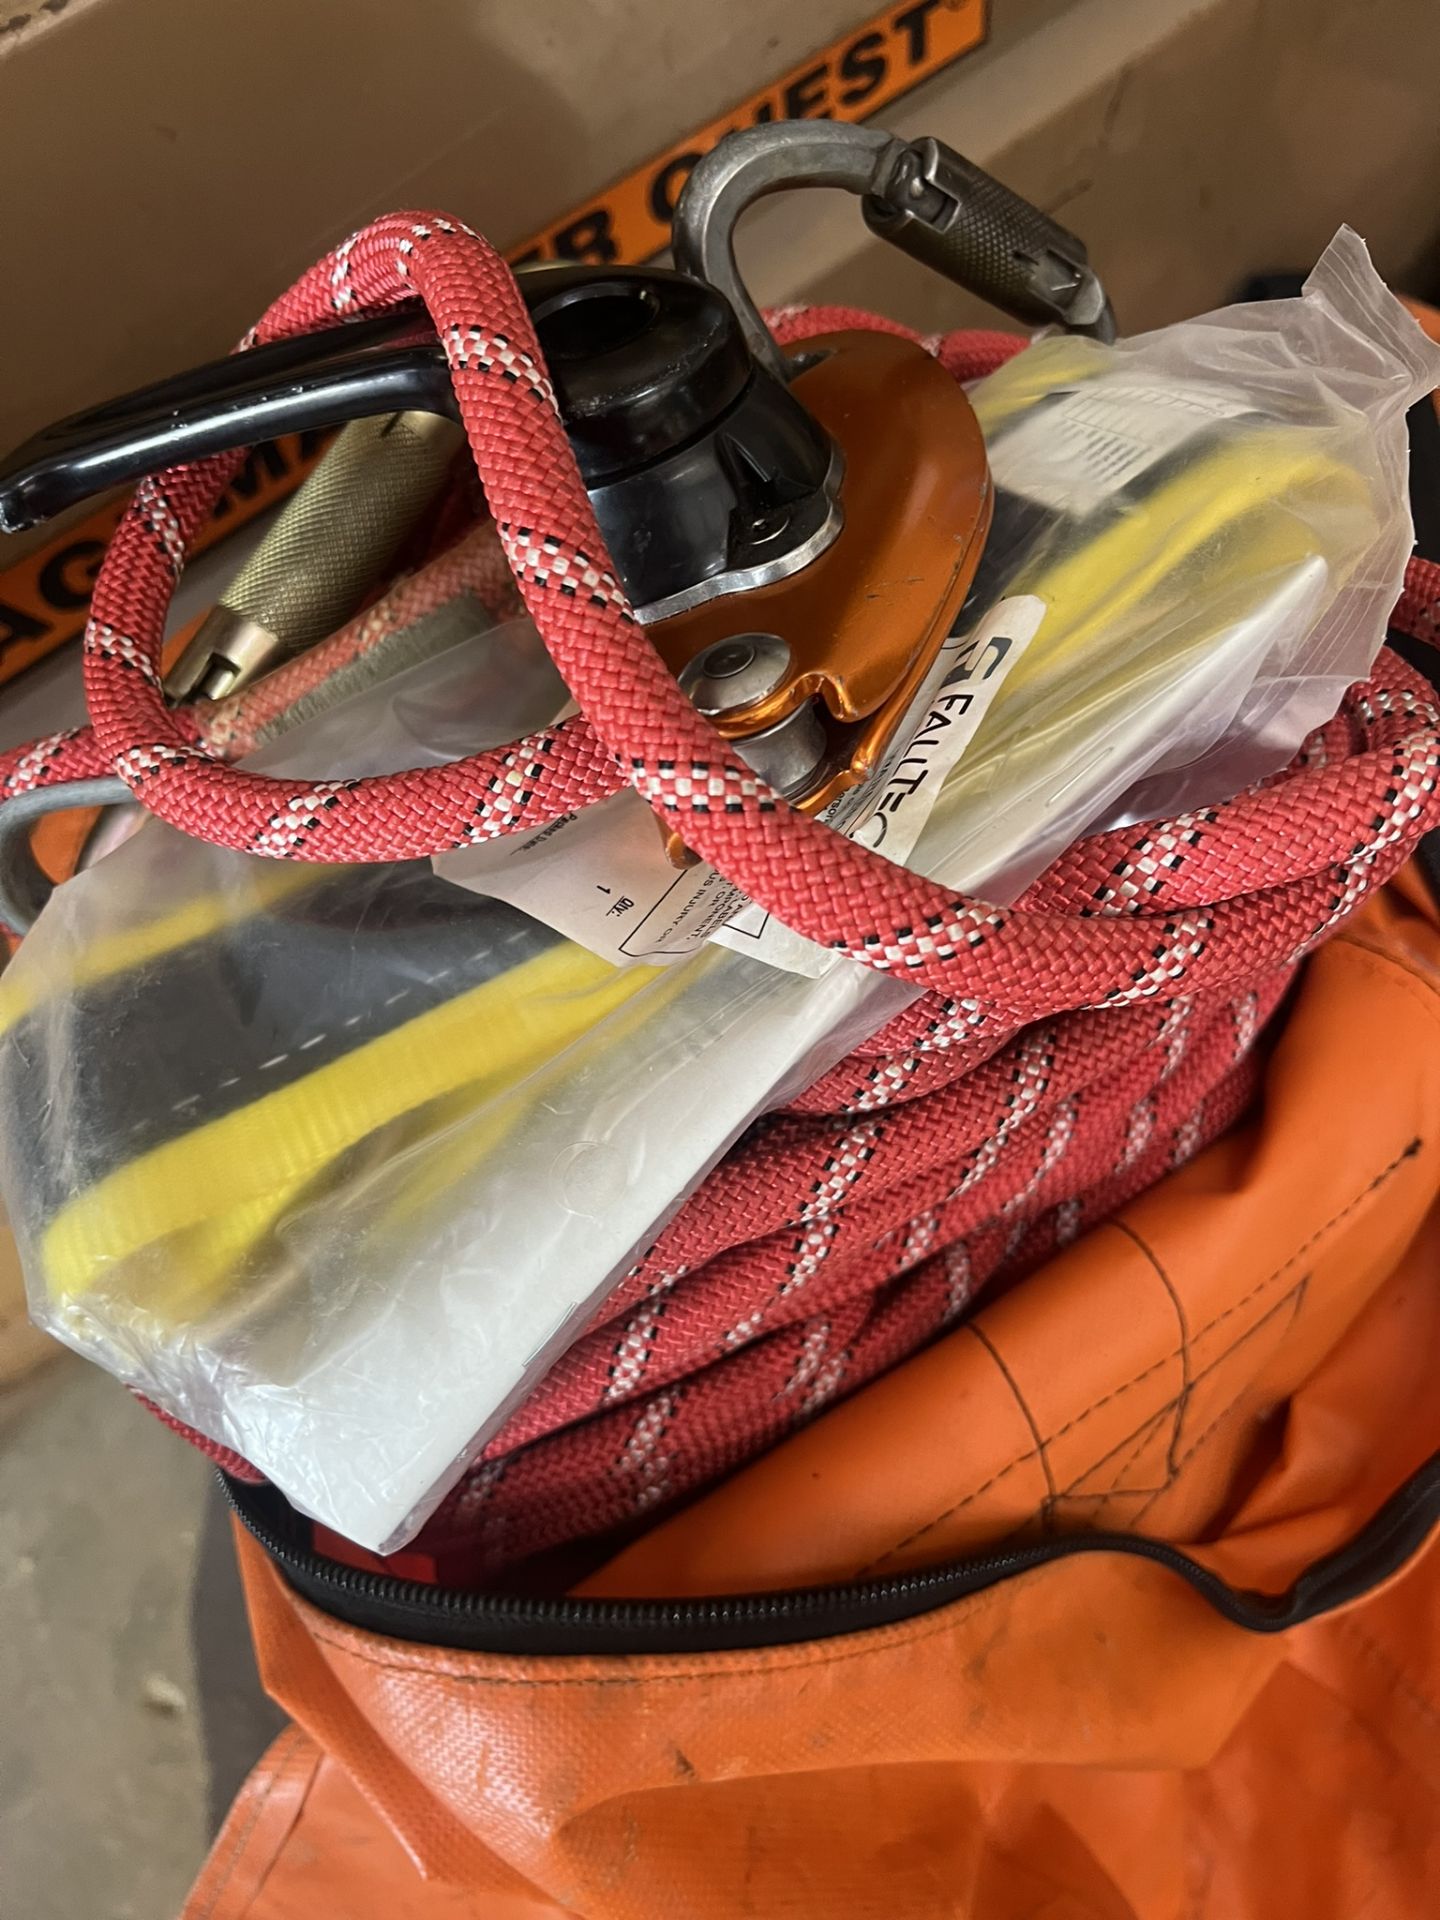 GME Climb Higher Repelling Standard Rescue Kit w/ 600ft ropes - Bild 2 aus 2